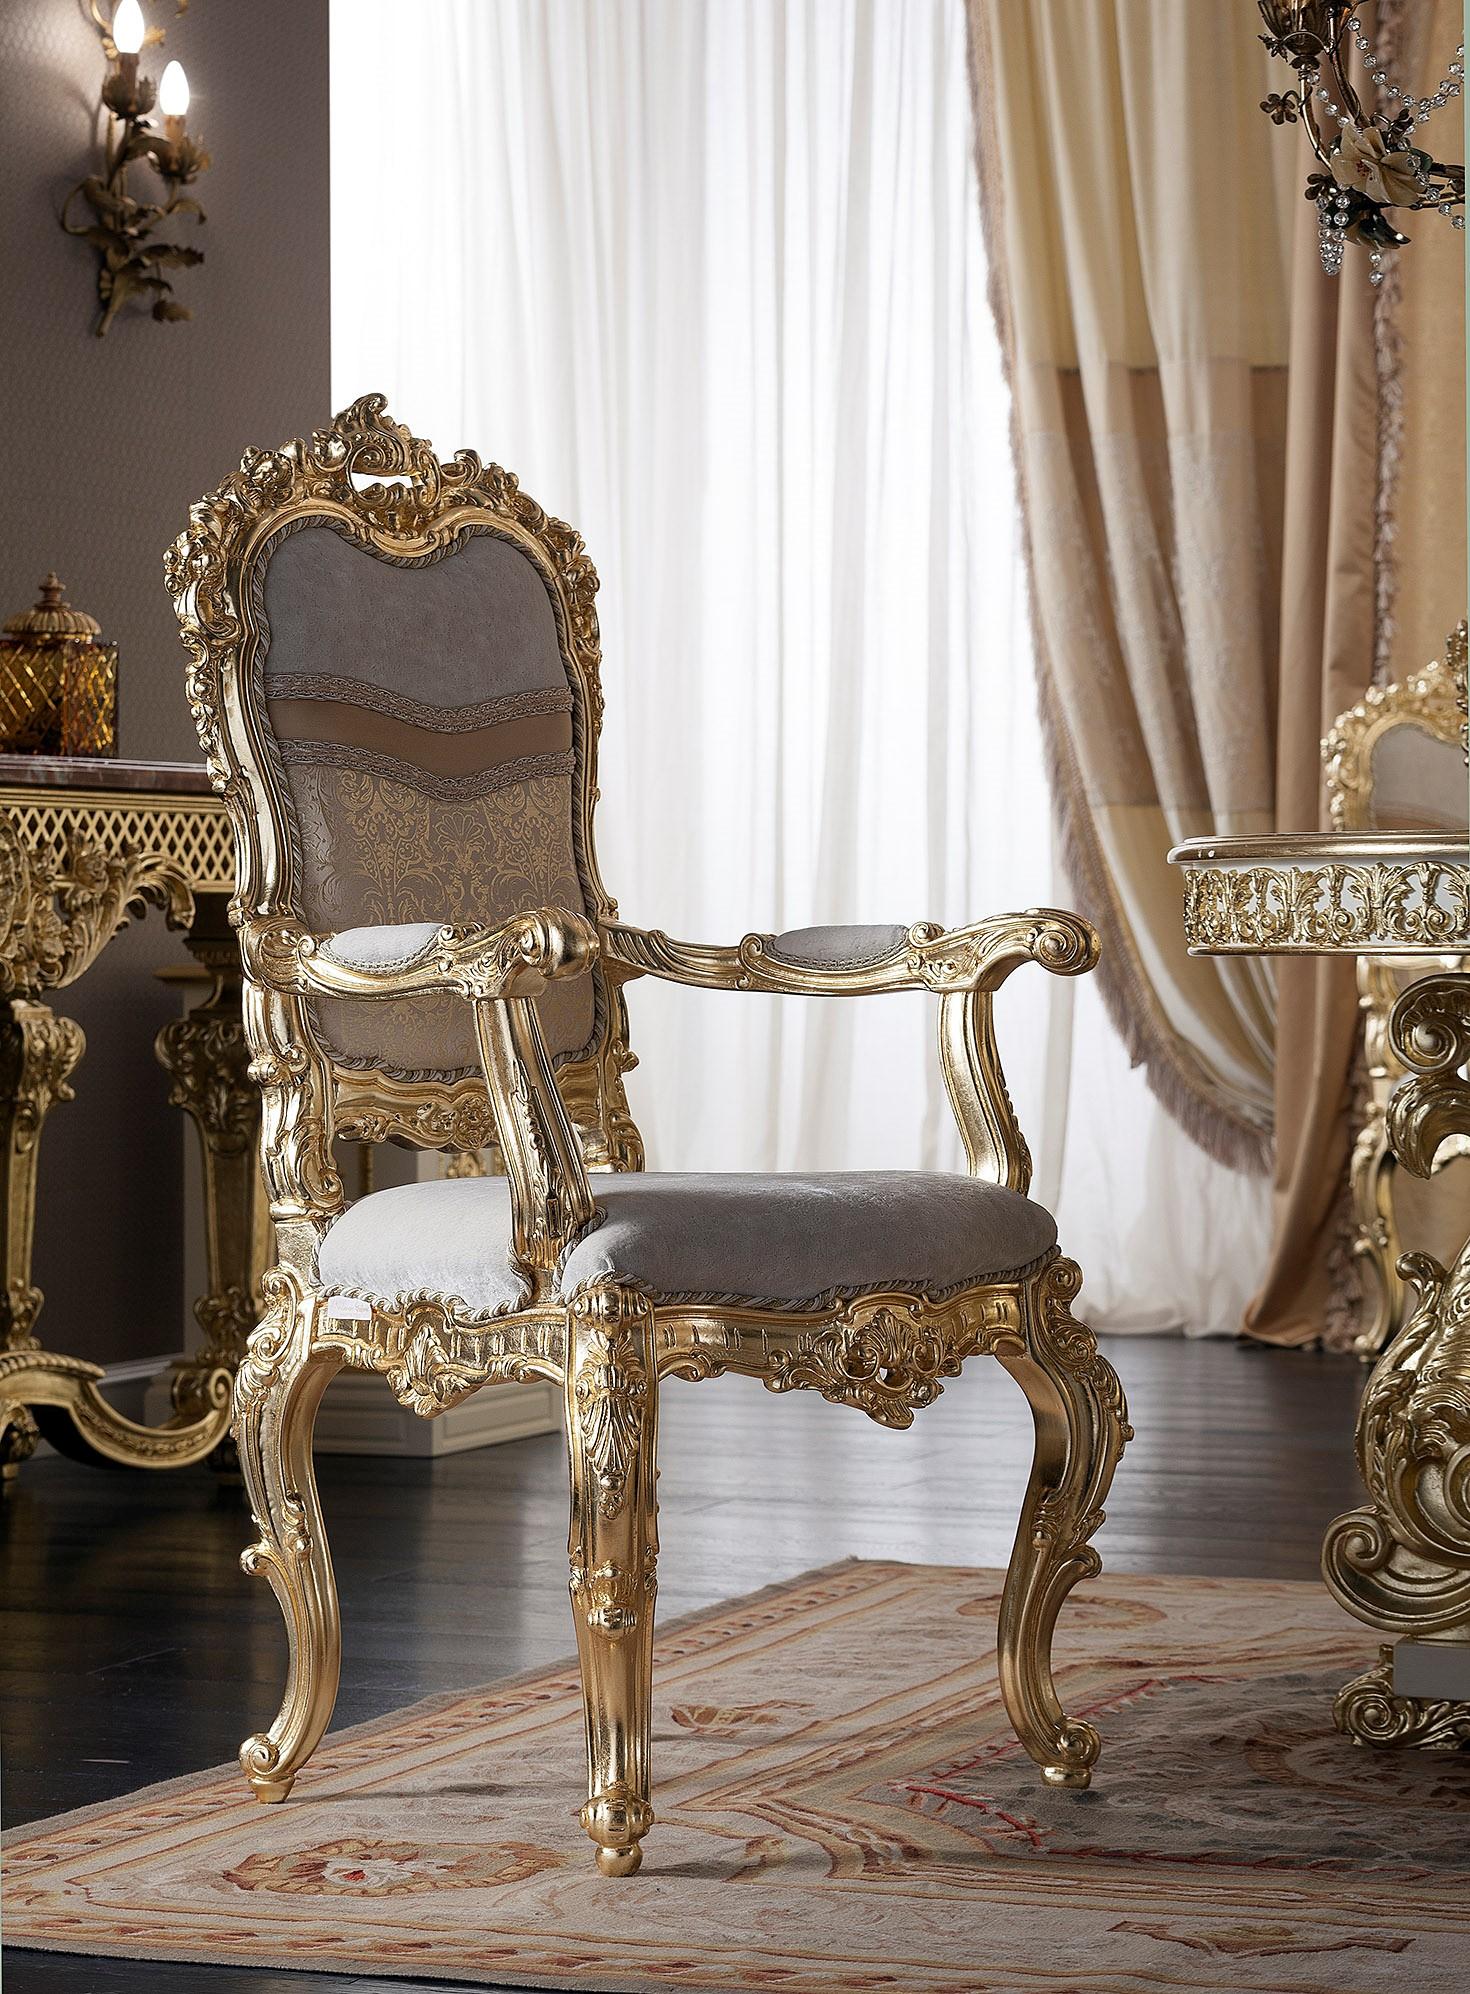 Enjoy your royal meal while sitting on this wonderfully upholstered chair with armrests by Modenese Gastone Interiors featuring a wood frame gold leaf applied in details, upholstered with a premium grey satin fabric. What's more? The incredibly